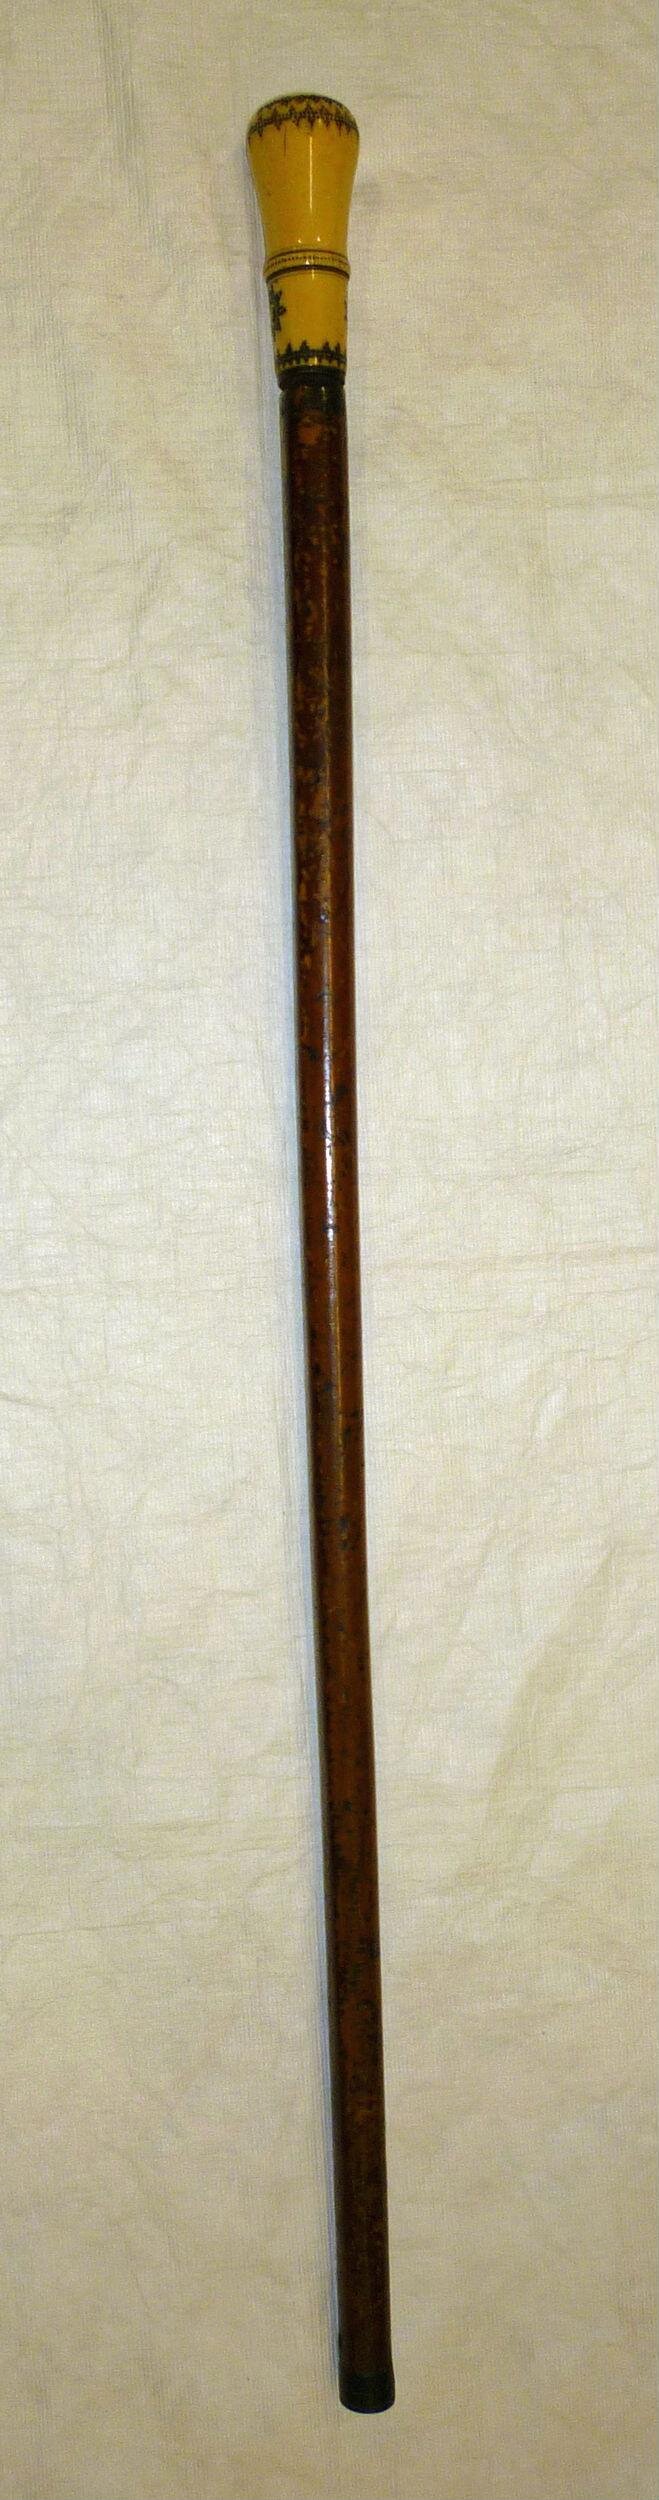 Cane top image